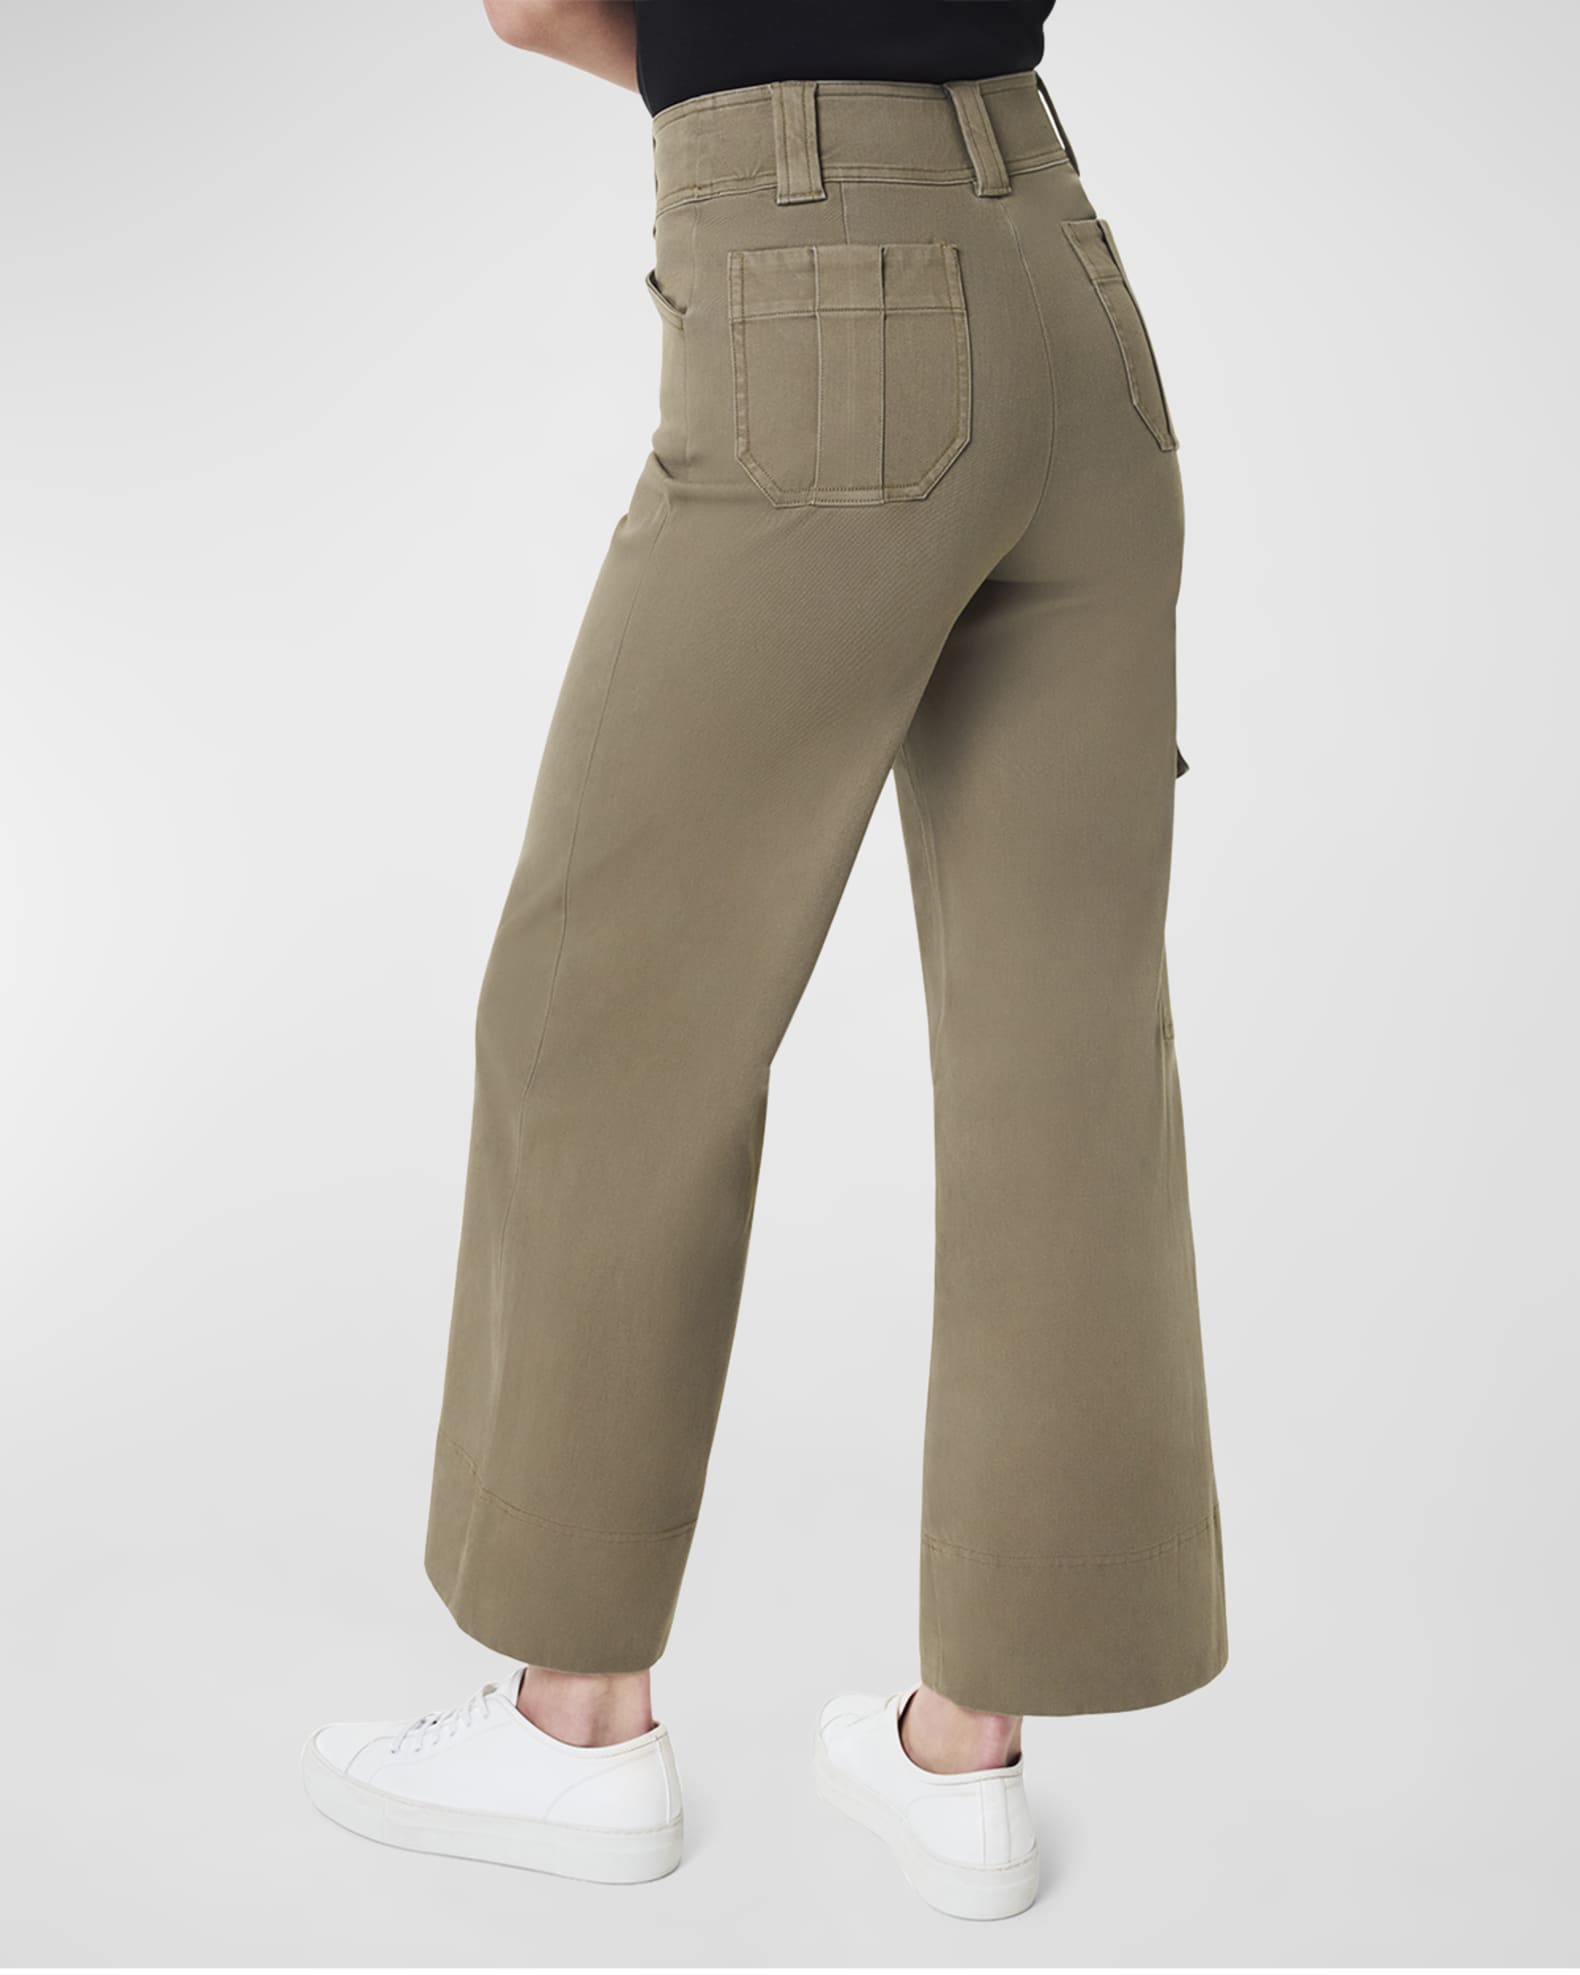 SPANX - Twill in the blank: These new Stretch Twill Cropped Wide Leg Pants  on Spanx.com make me want to add to cart like ______! They're designed with  the magic of Spanx